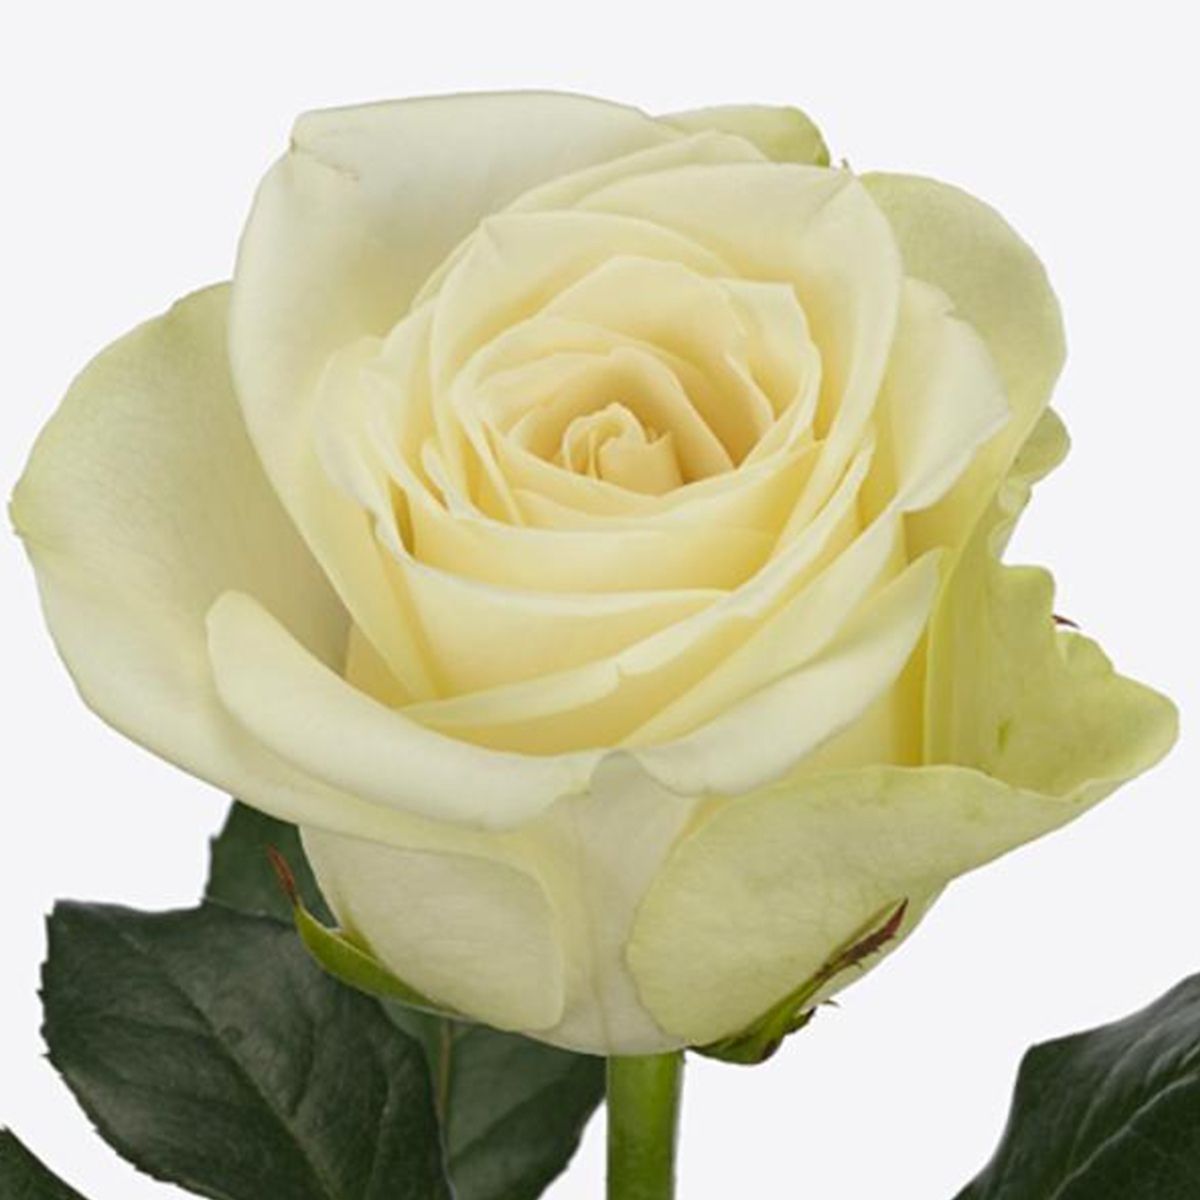 The Snowstorm+ Rose - Your Go-To Flower To Unfold or Reflex - normal raw snowstorm rose